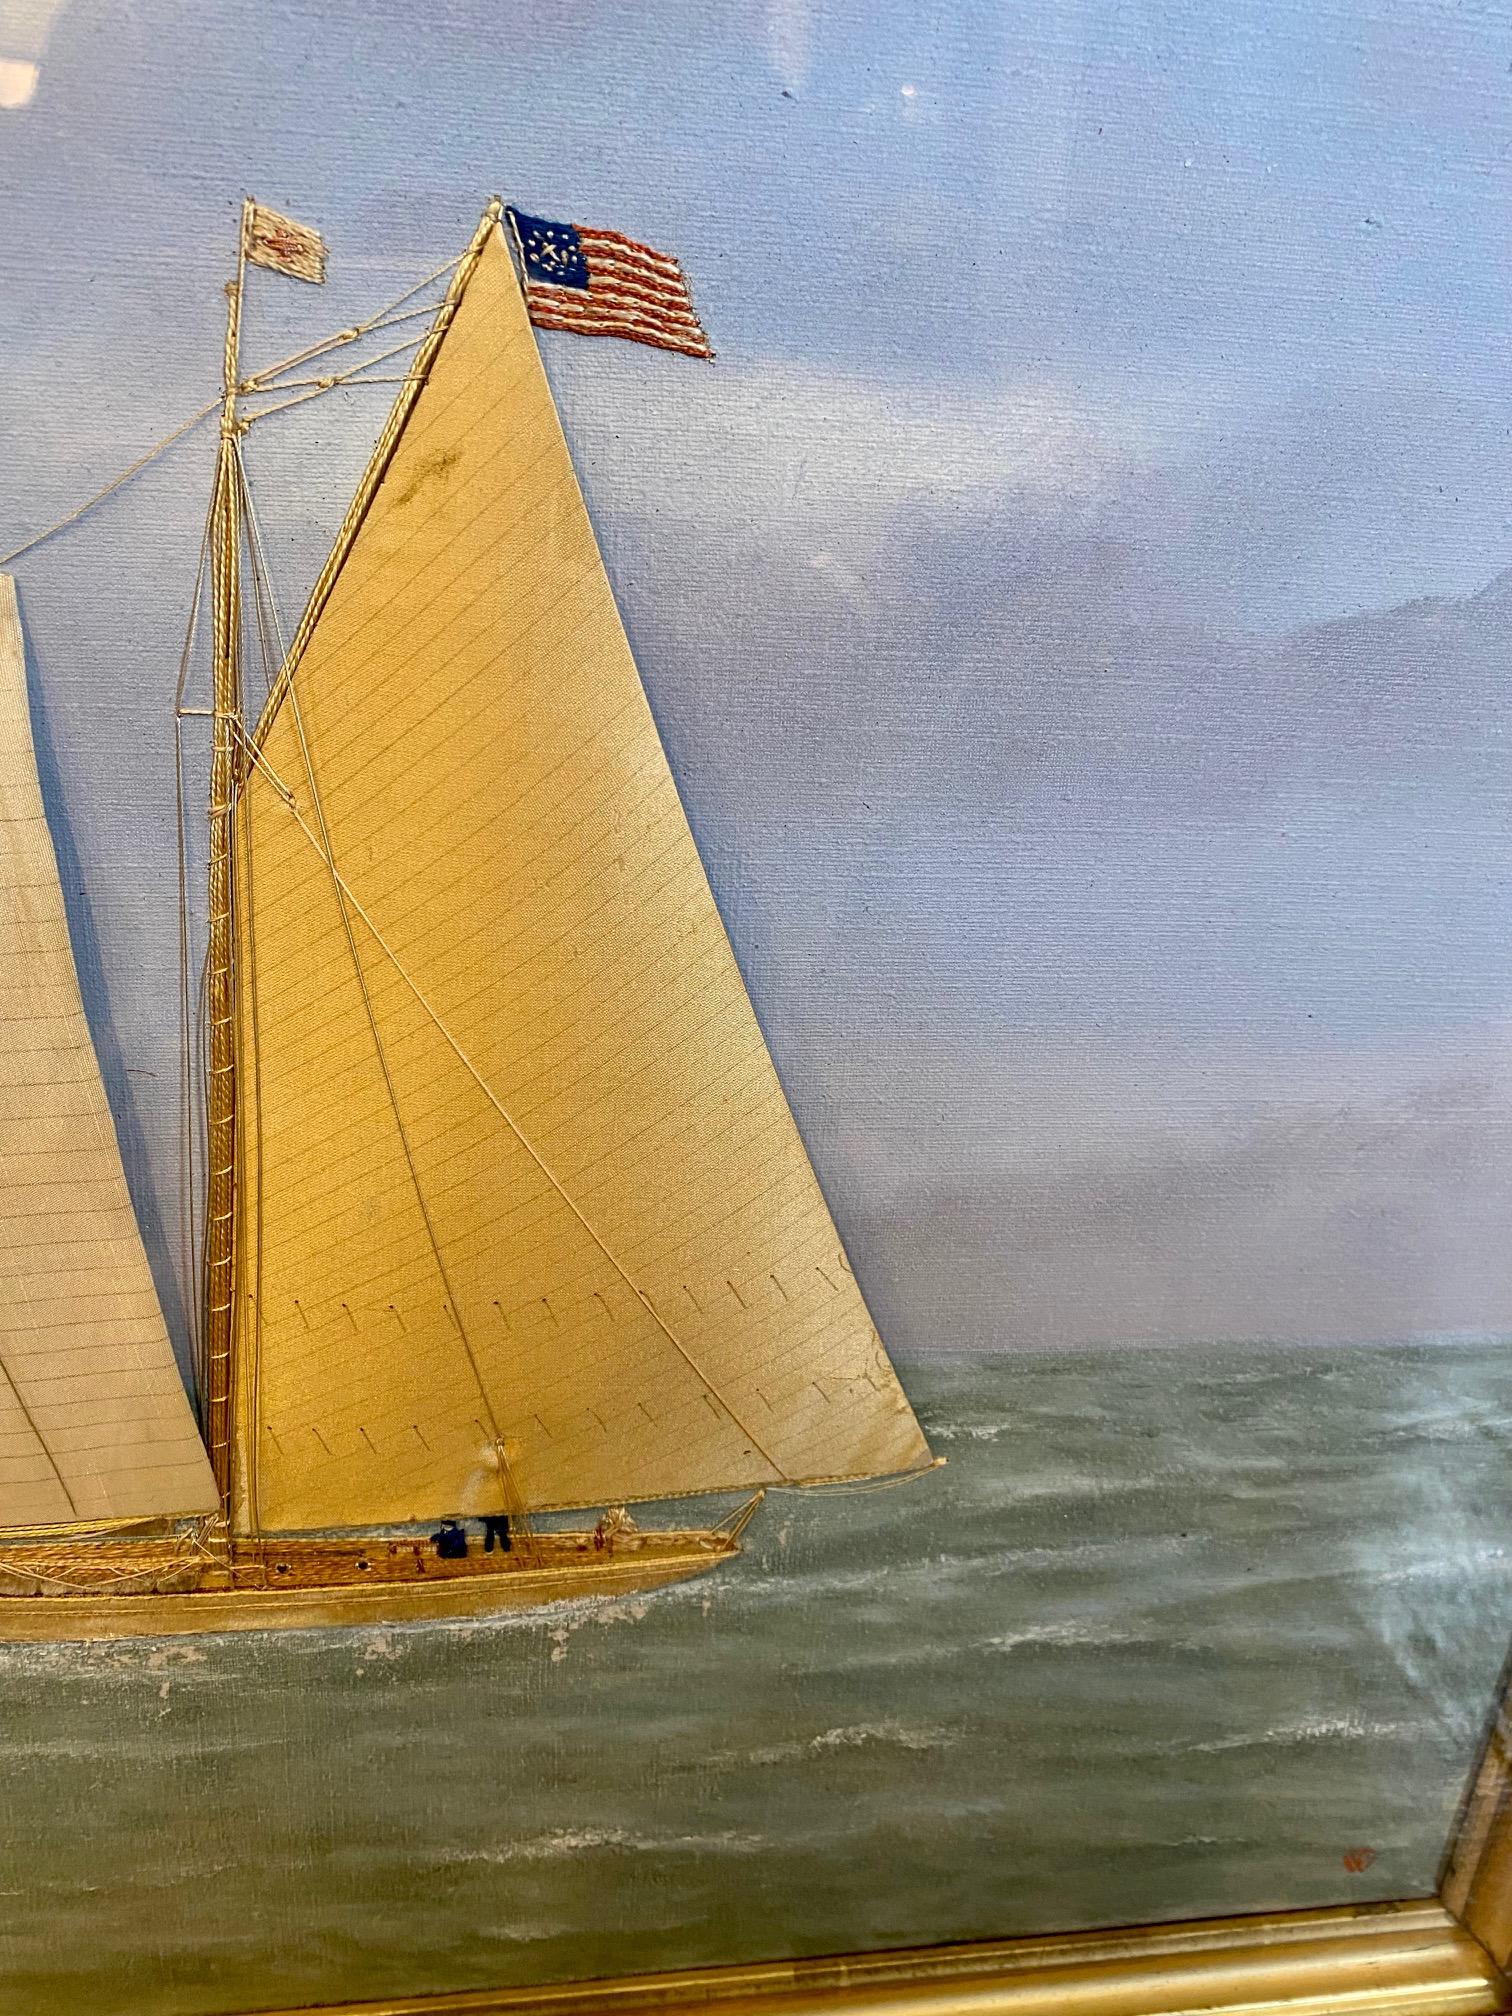 19th century silk embroidered and hand painted oil on canvas seascape by Thomas Willis (1850 - 1925), depicting a schooner-rigged racing yacht closely hauled on a starboard tack, flying the American Ensign and Burgee of the New York Yacht Club, two